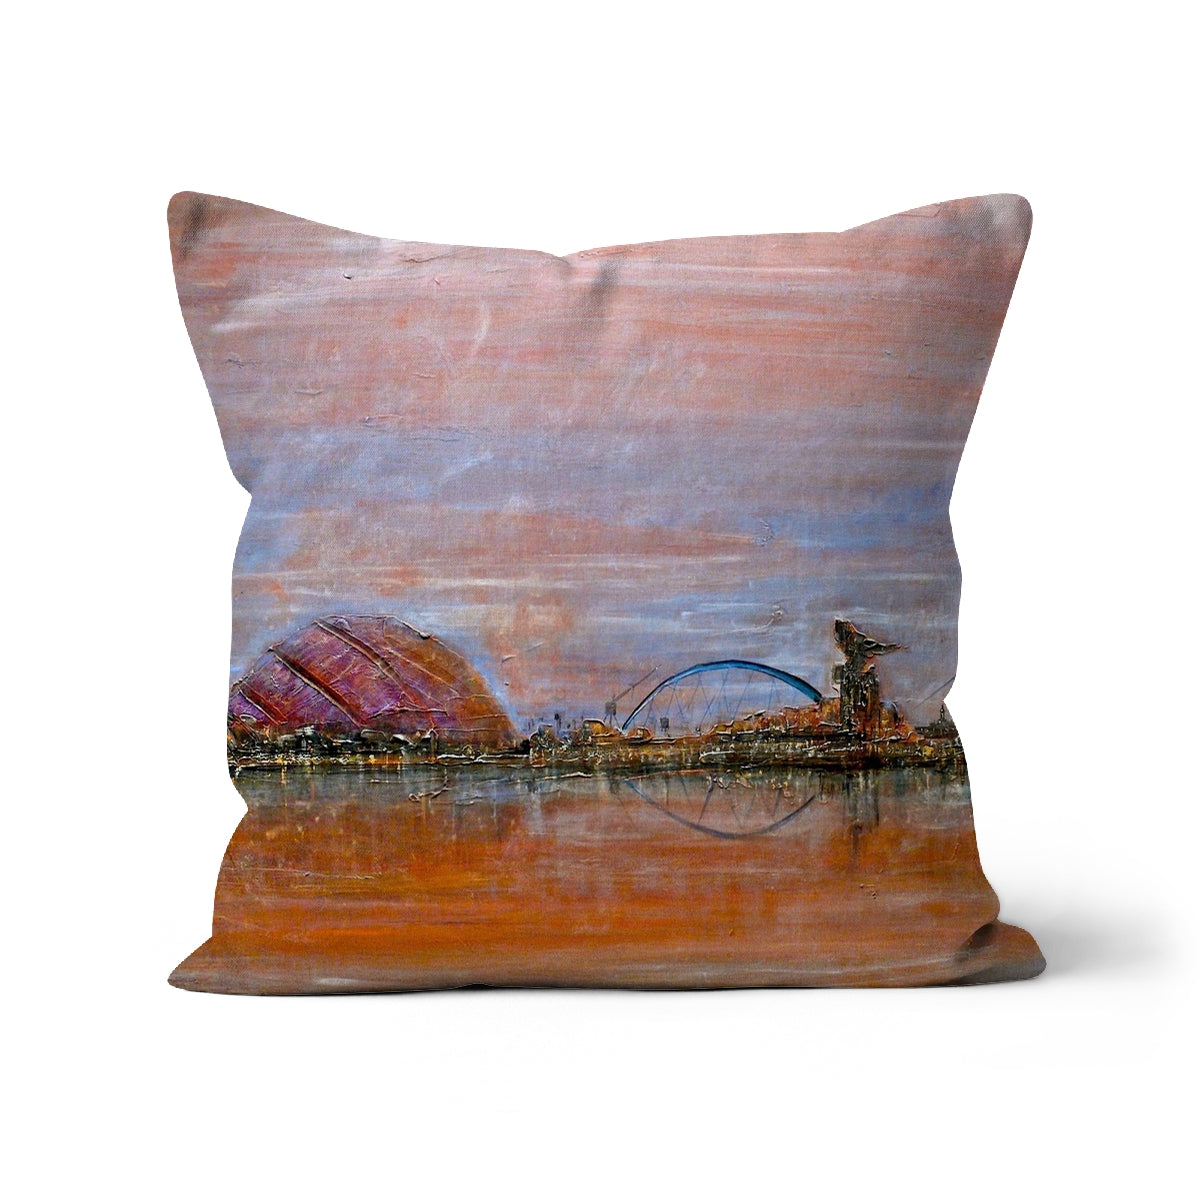 Glasgow Harbour Art Gifts Cushion-Cushions-Edinburgh & Glasgow Art Gallery-Faux Suede-24"x24"-Paintings, Prints, Homeware, Art Gifts From Scotland By Scottish Artist Kevin Hunter